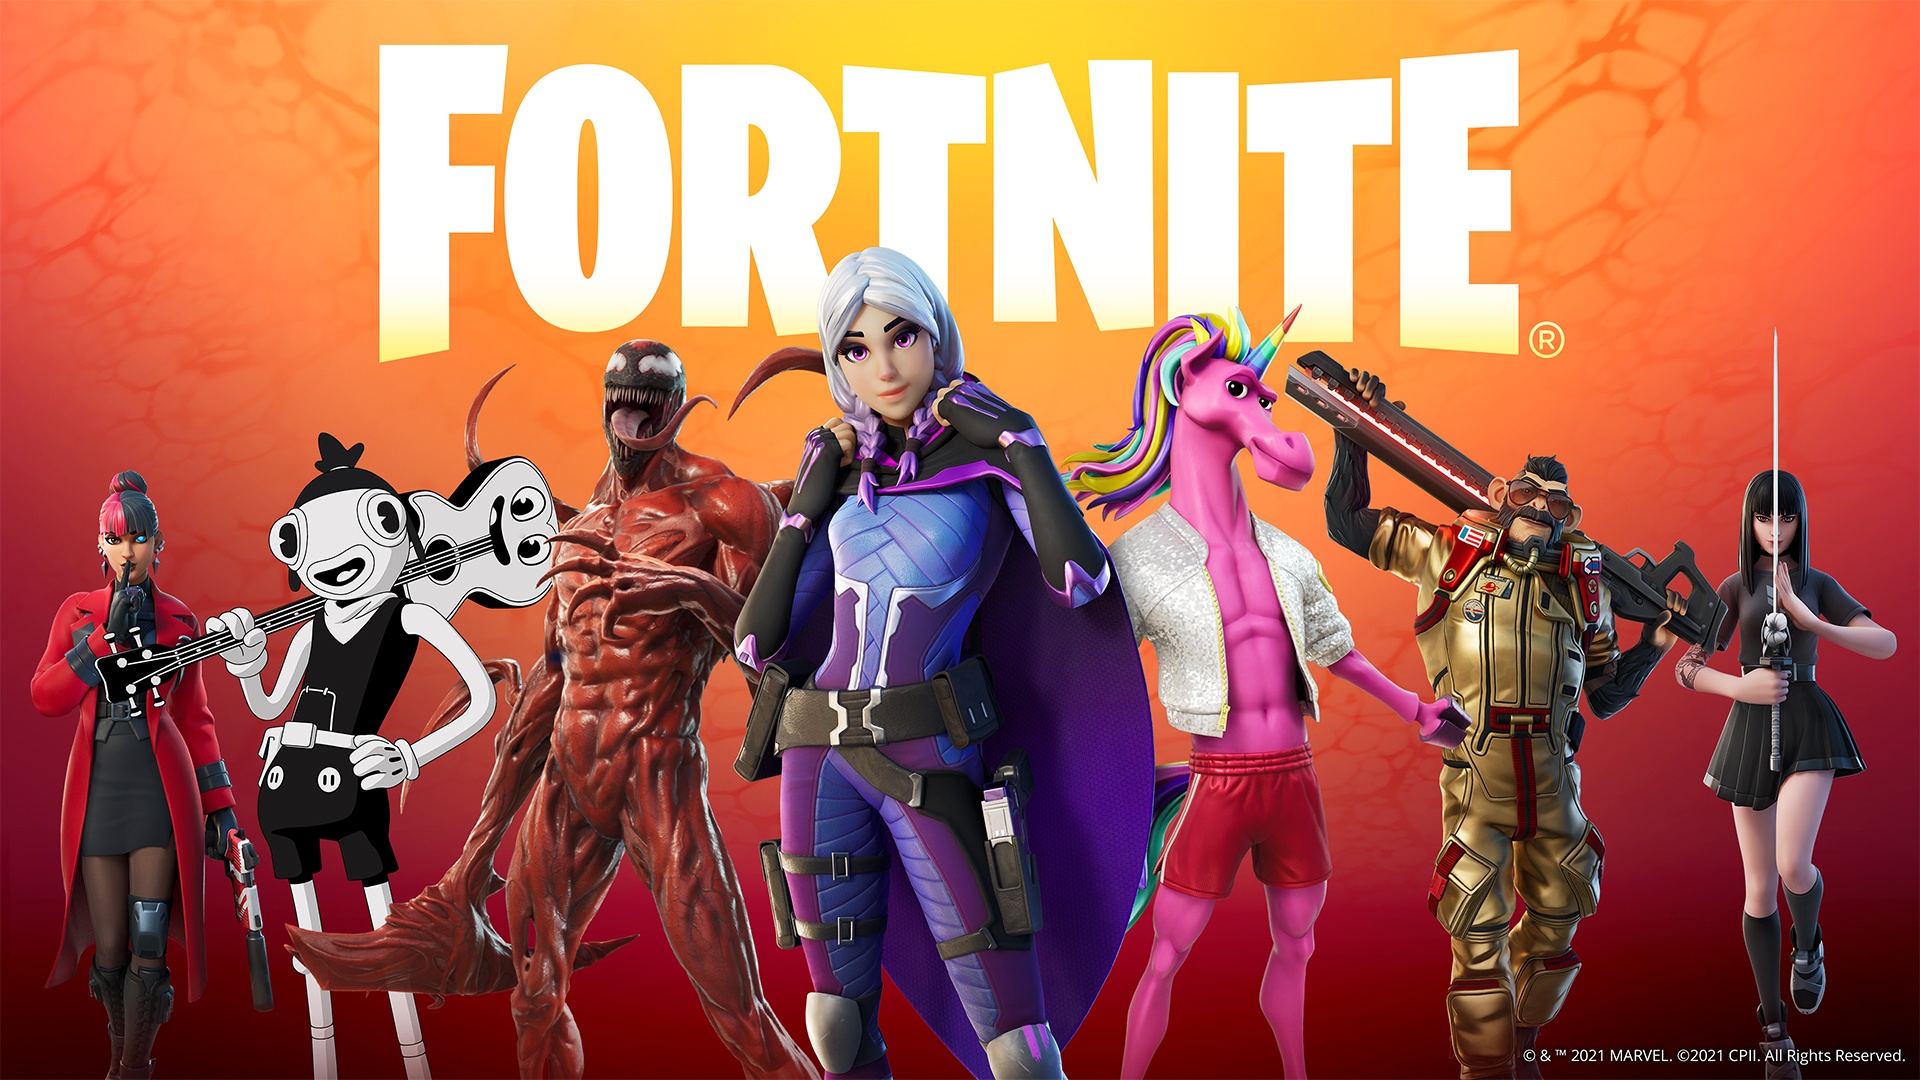 Seven Fortnite characters with Fortnite title 